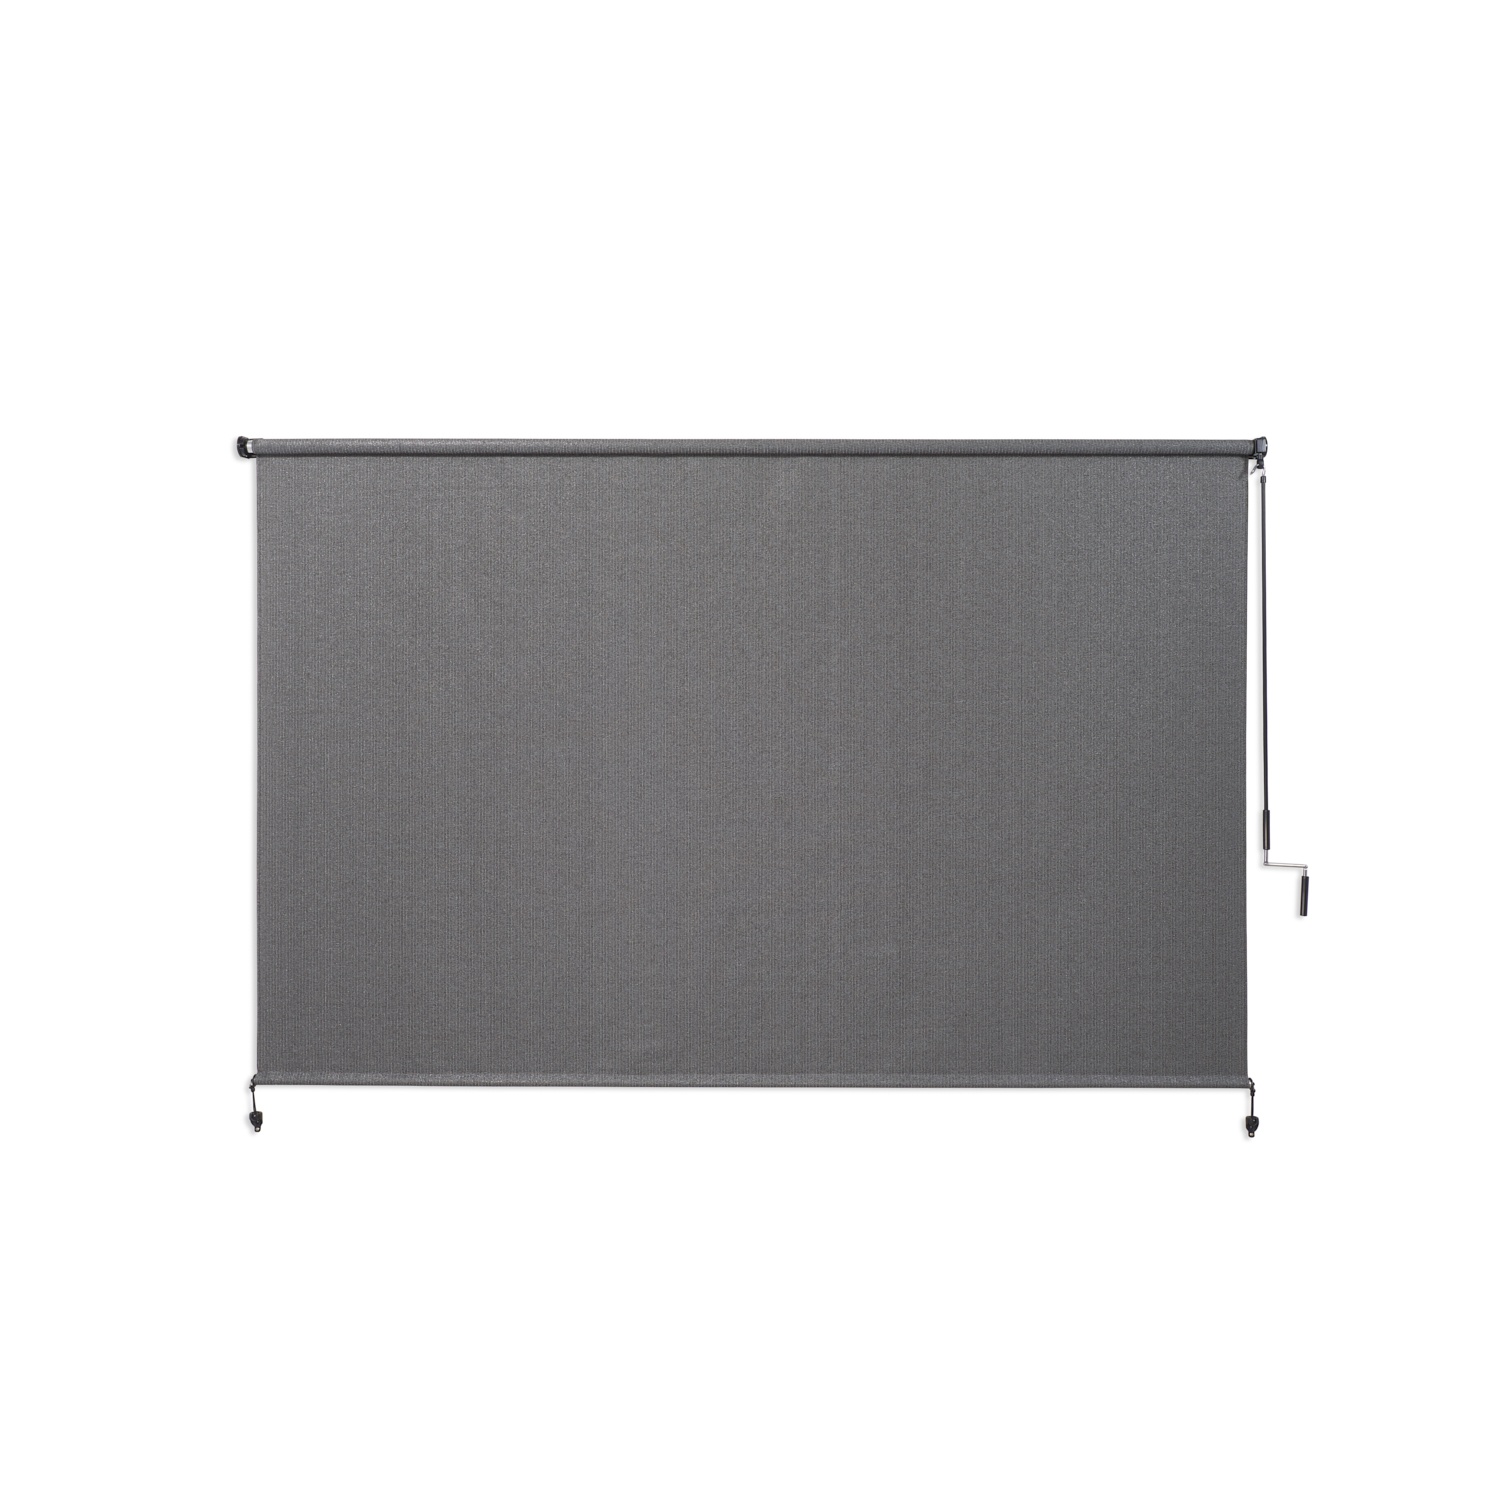 Voticky Exterior Outdoor Cordless Roller Shade Patio Sun Blind Roll Up Shade 8'X8' Gray 